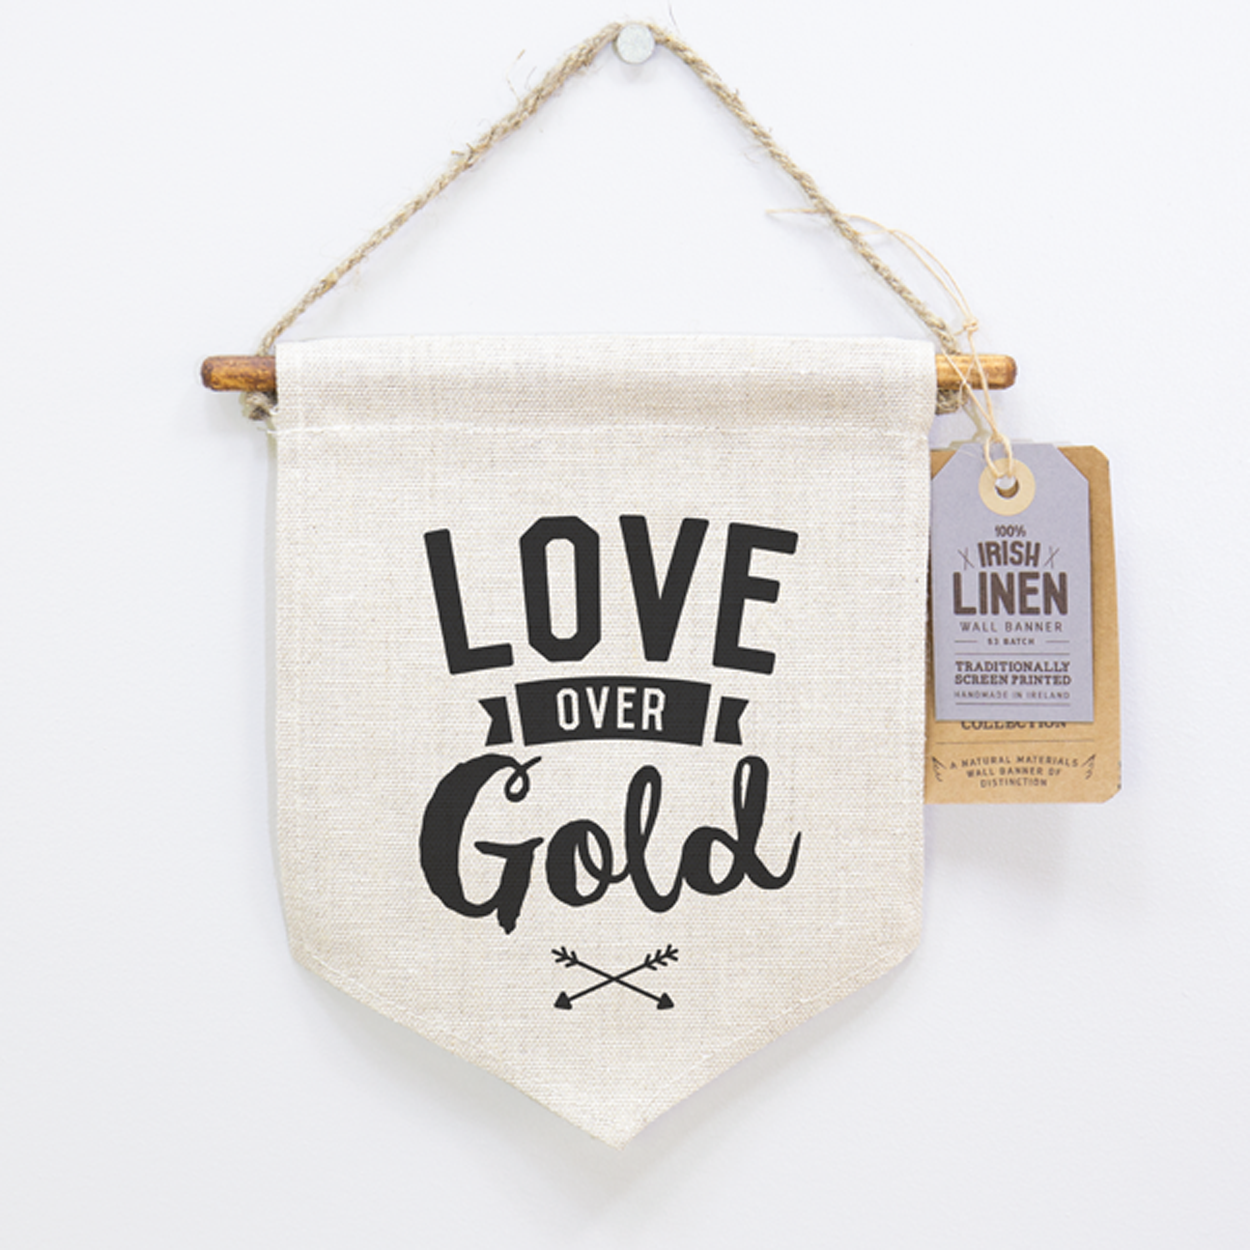 Love Over Gold, Wall Banner, Home Decor, Linen, Irish Craft, Quotes, Craft and Design, Itty Bitty Book Co